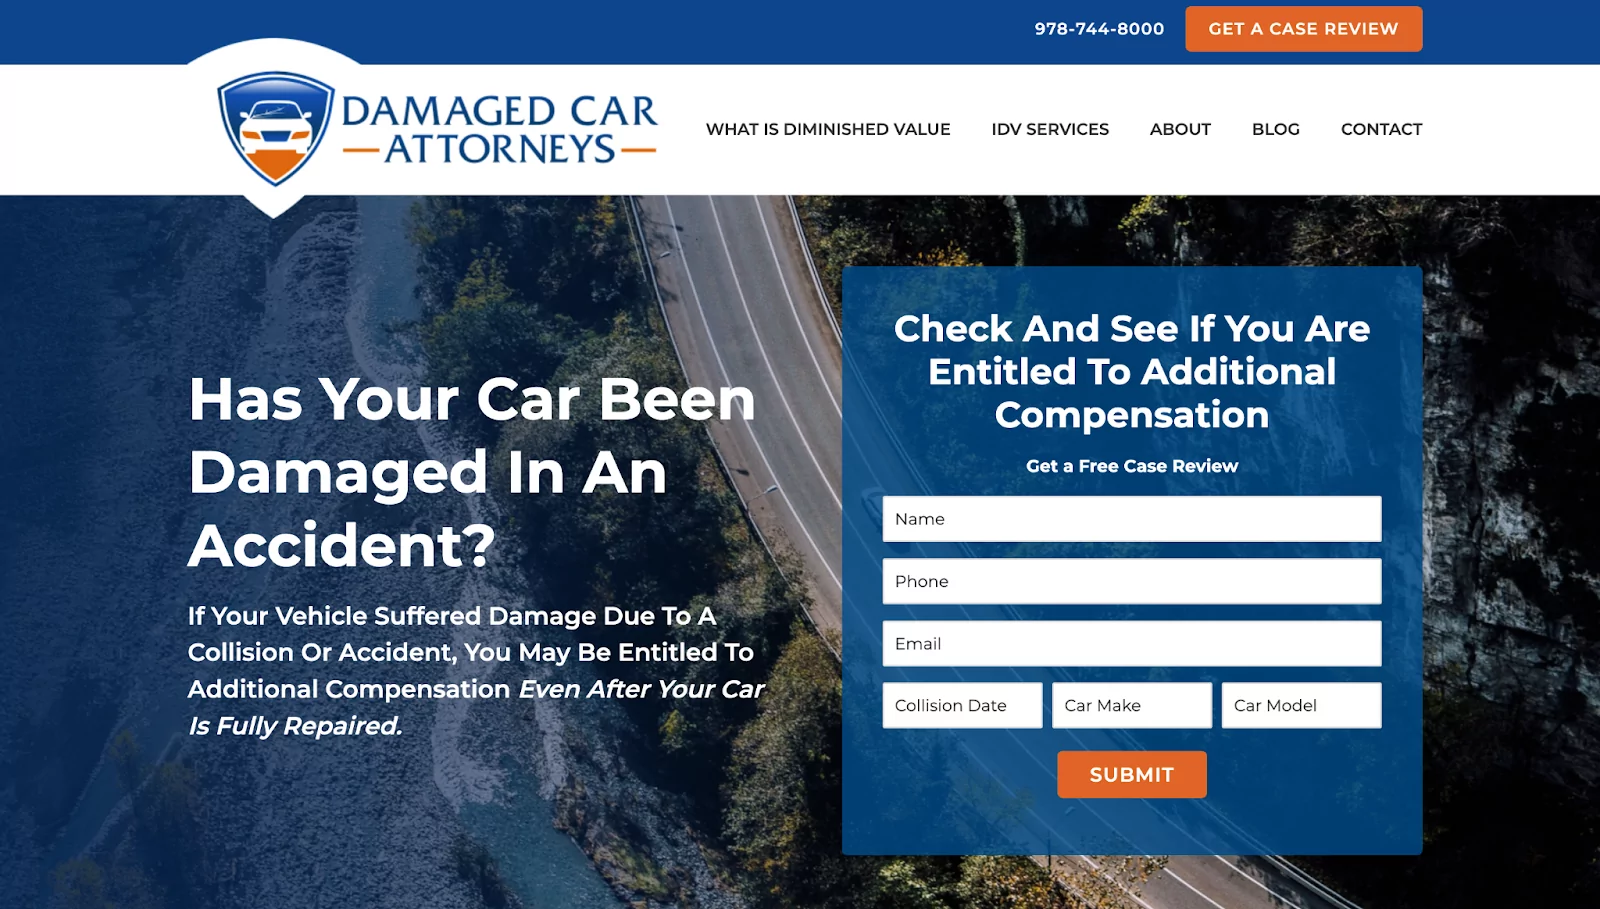 damaged car attorneys case review form